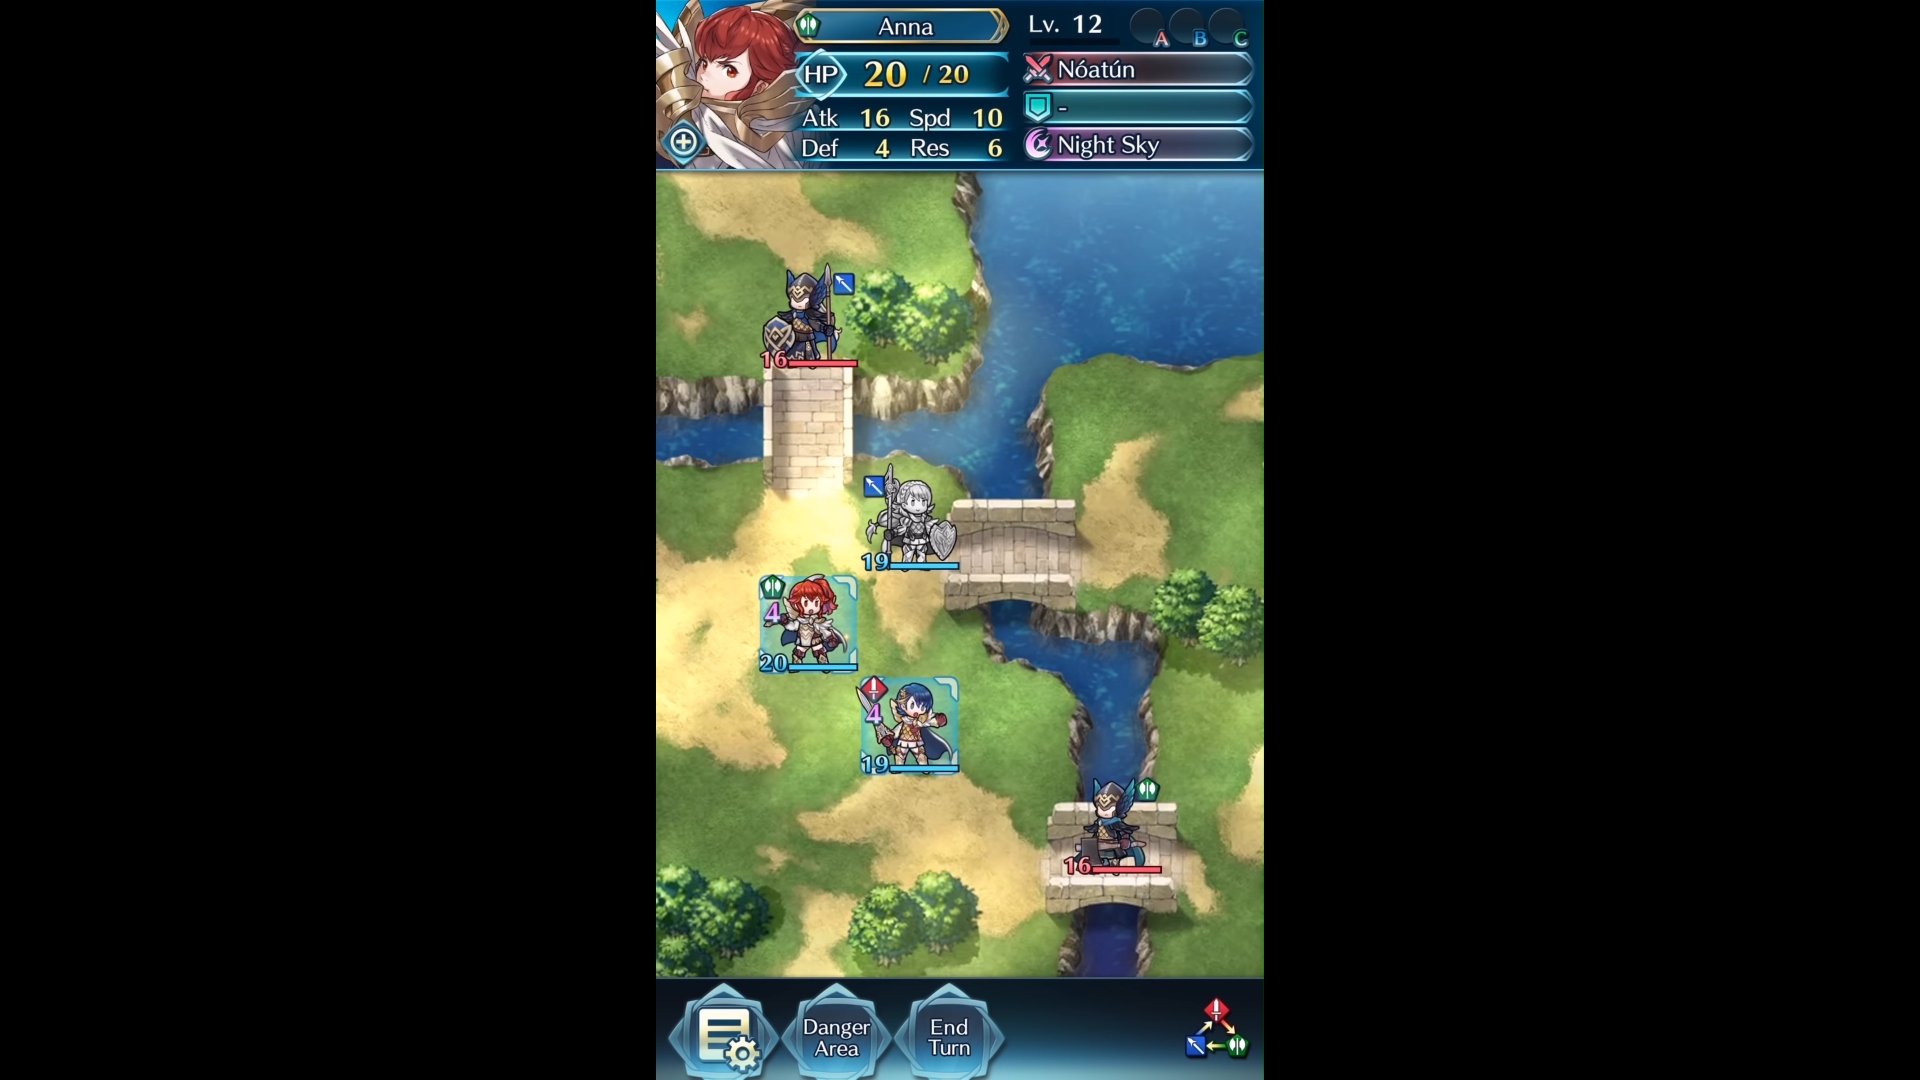 Best free strategy games: a screenshot from the game Fire Emblem Heroes shows a grid-based battle in process.